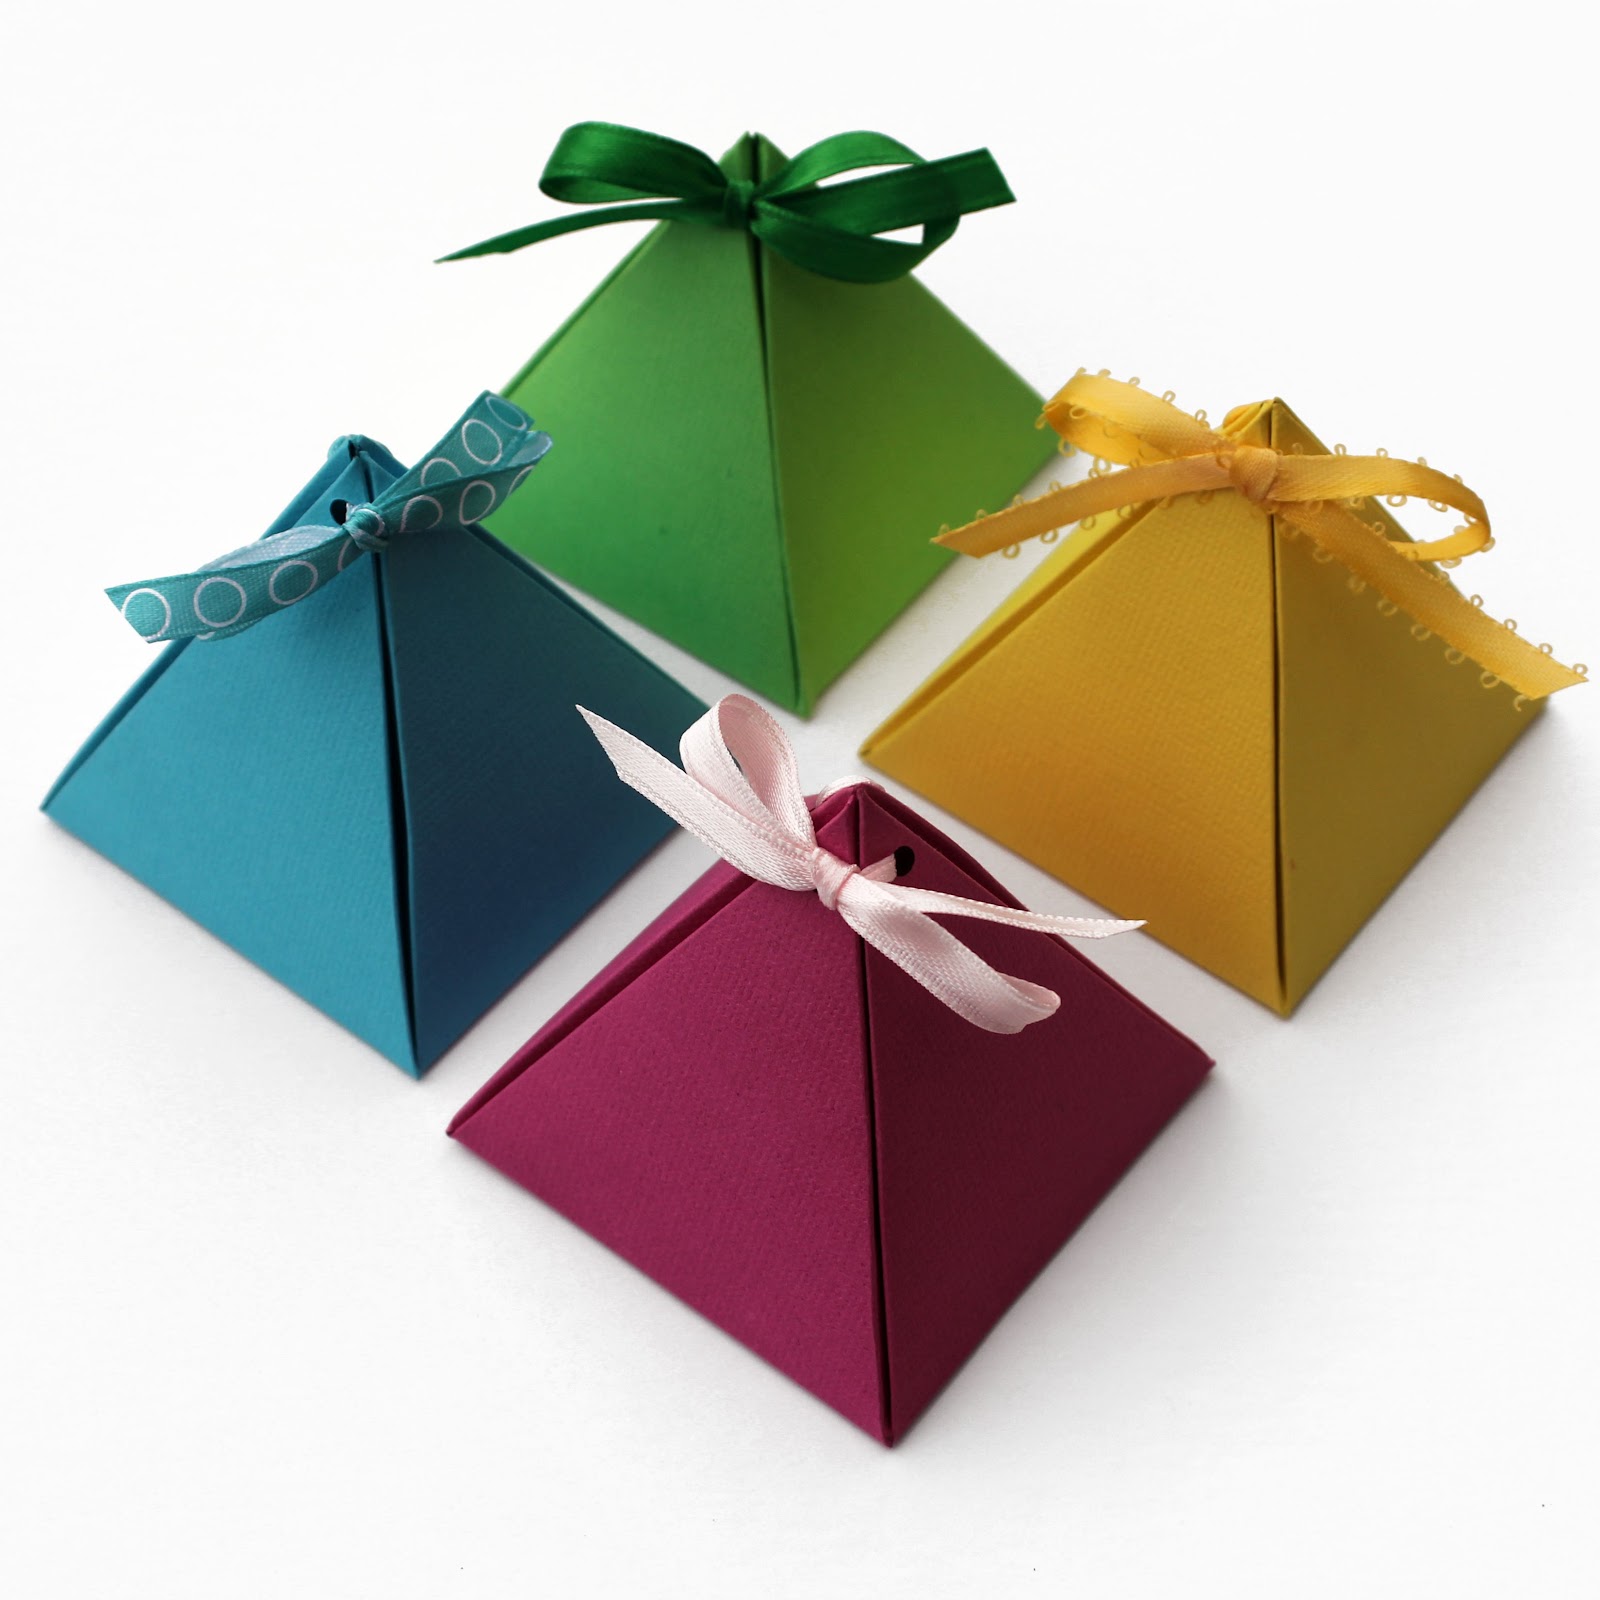 Lines Across": Paper Pyramid Gift Boxes